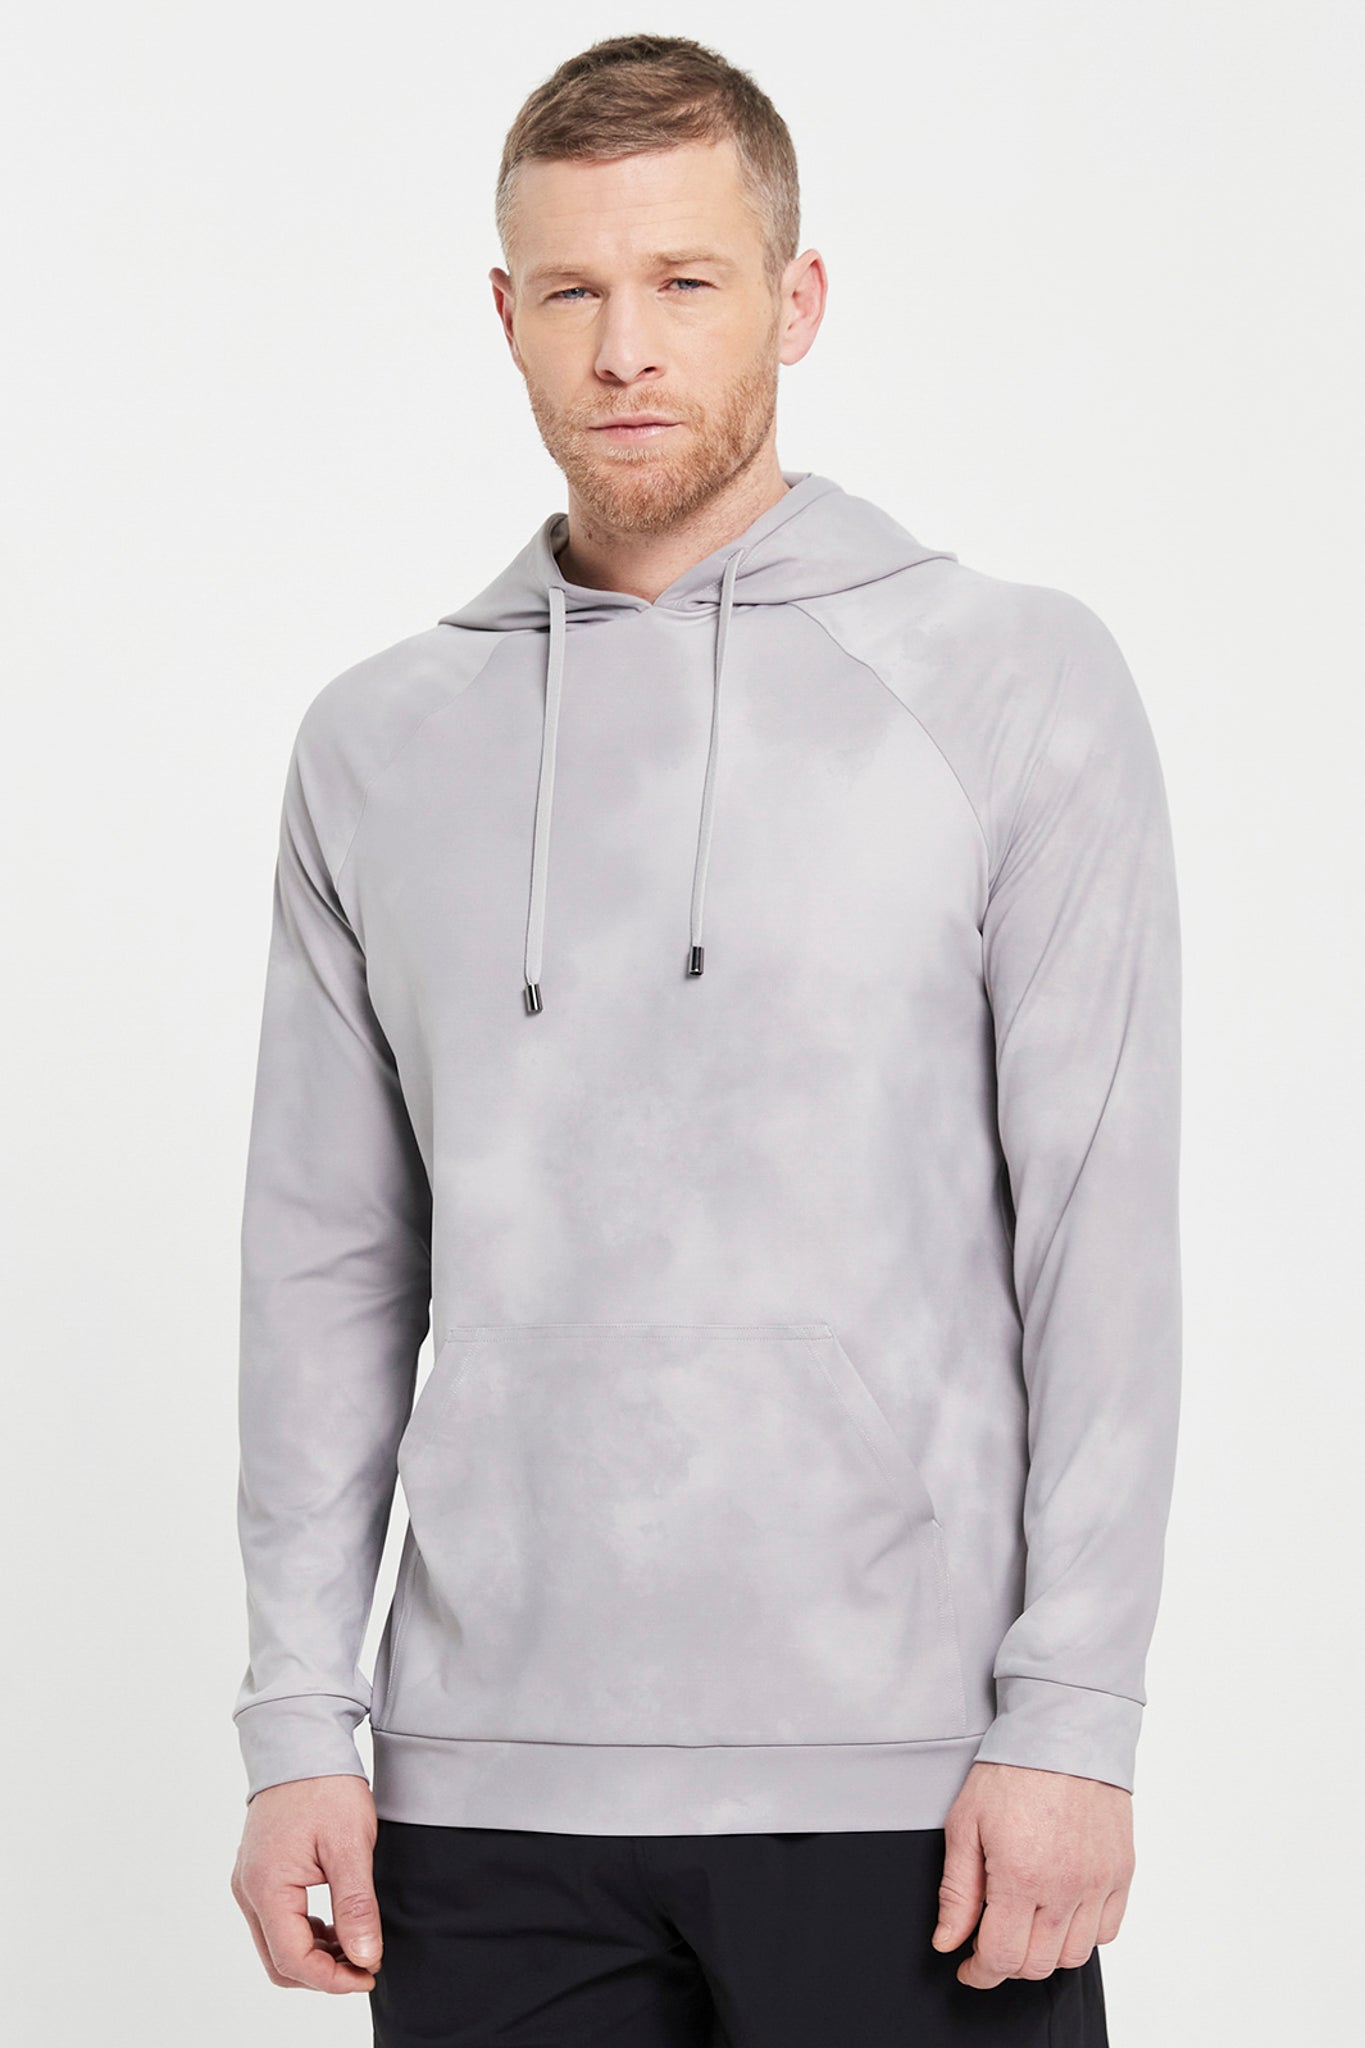 Image of the hicks hoodie in glacier gray